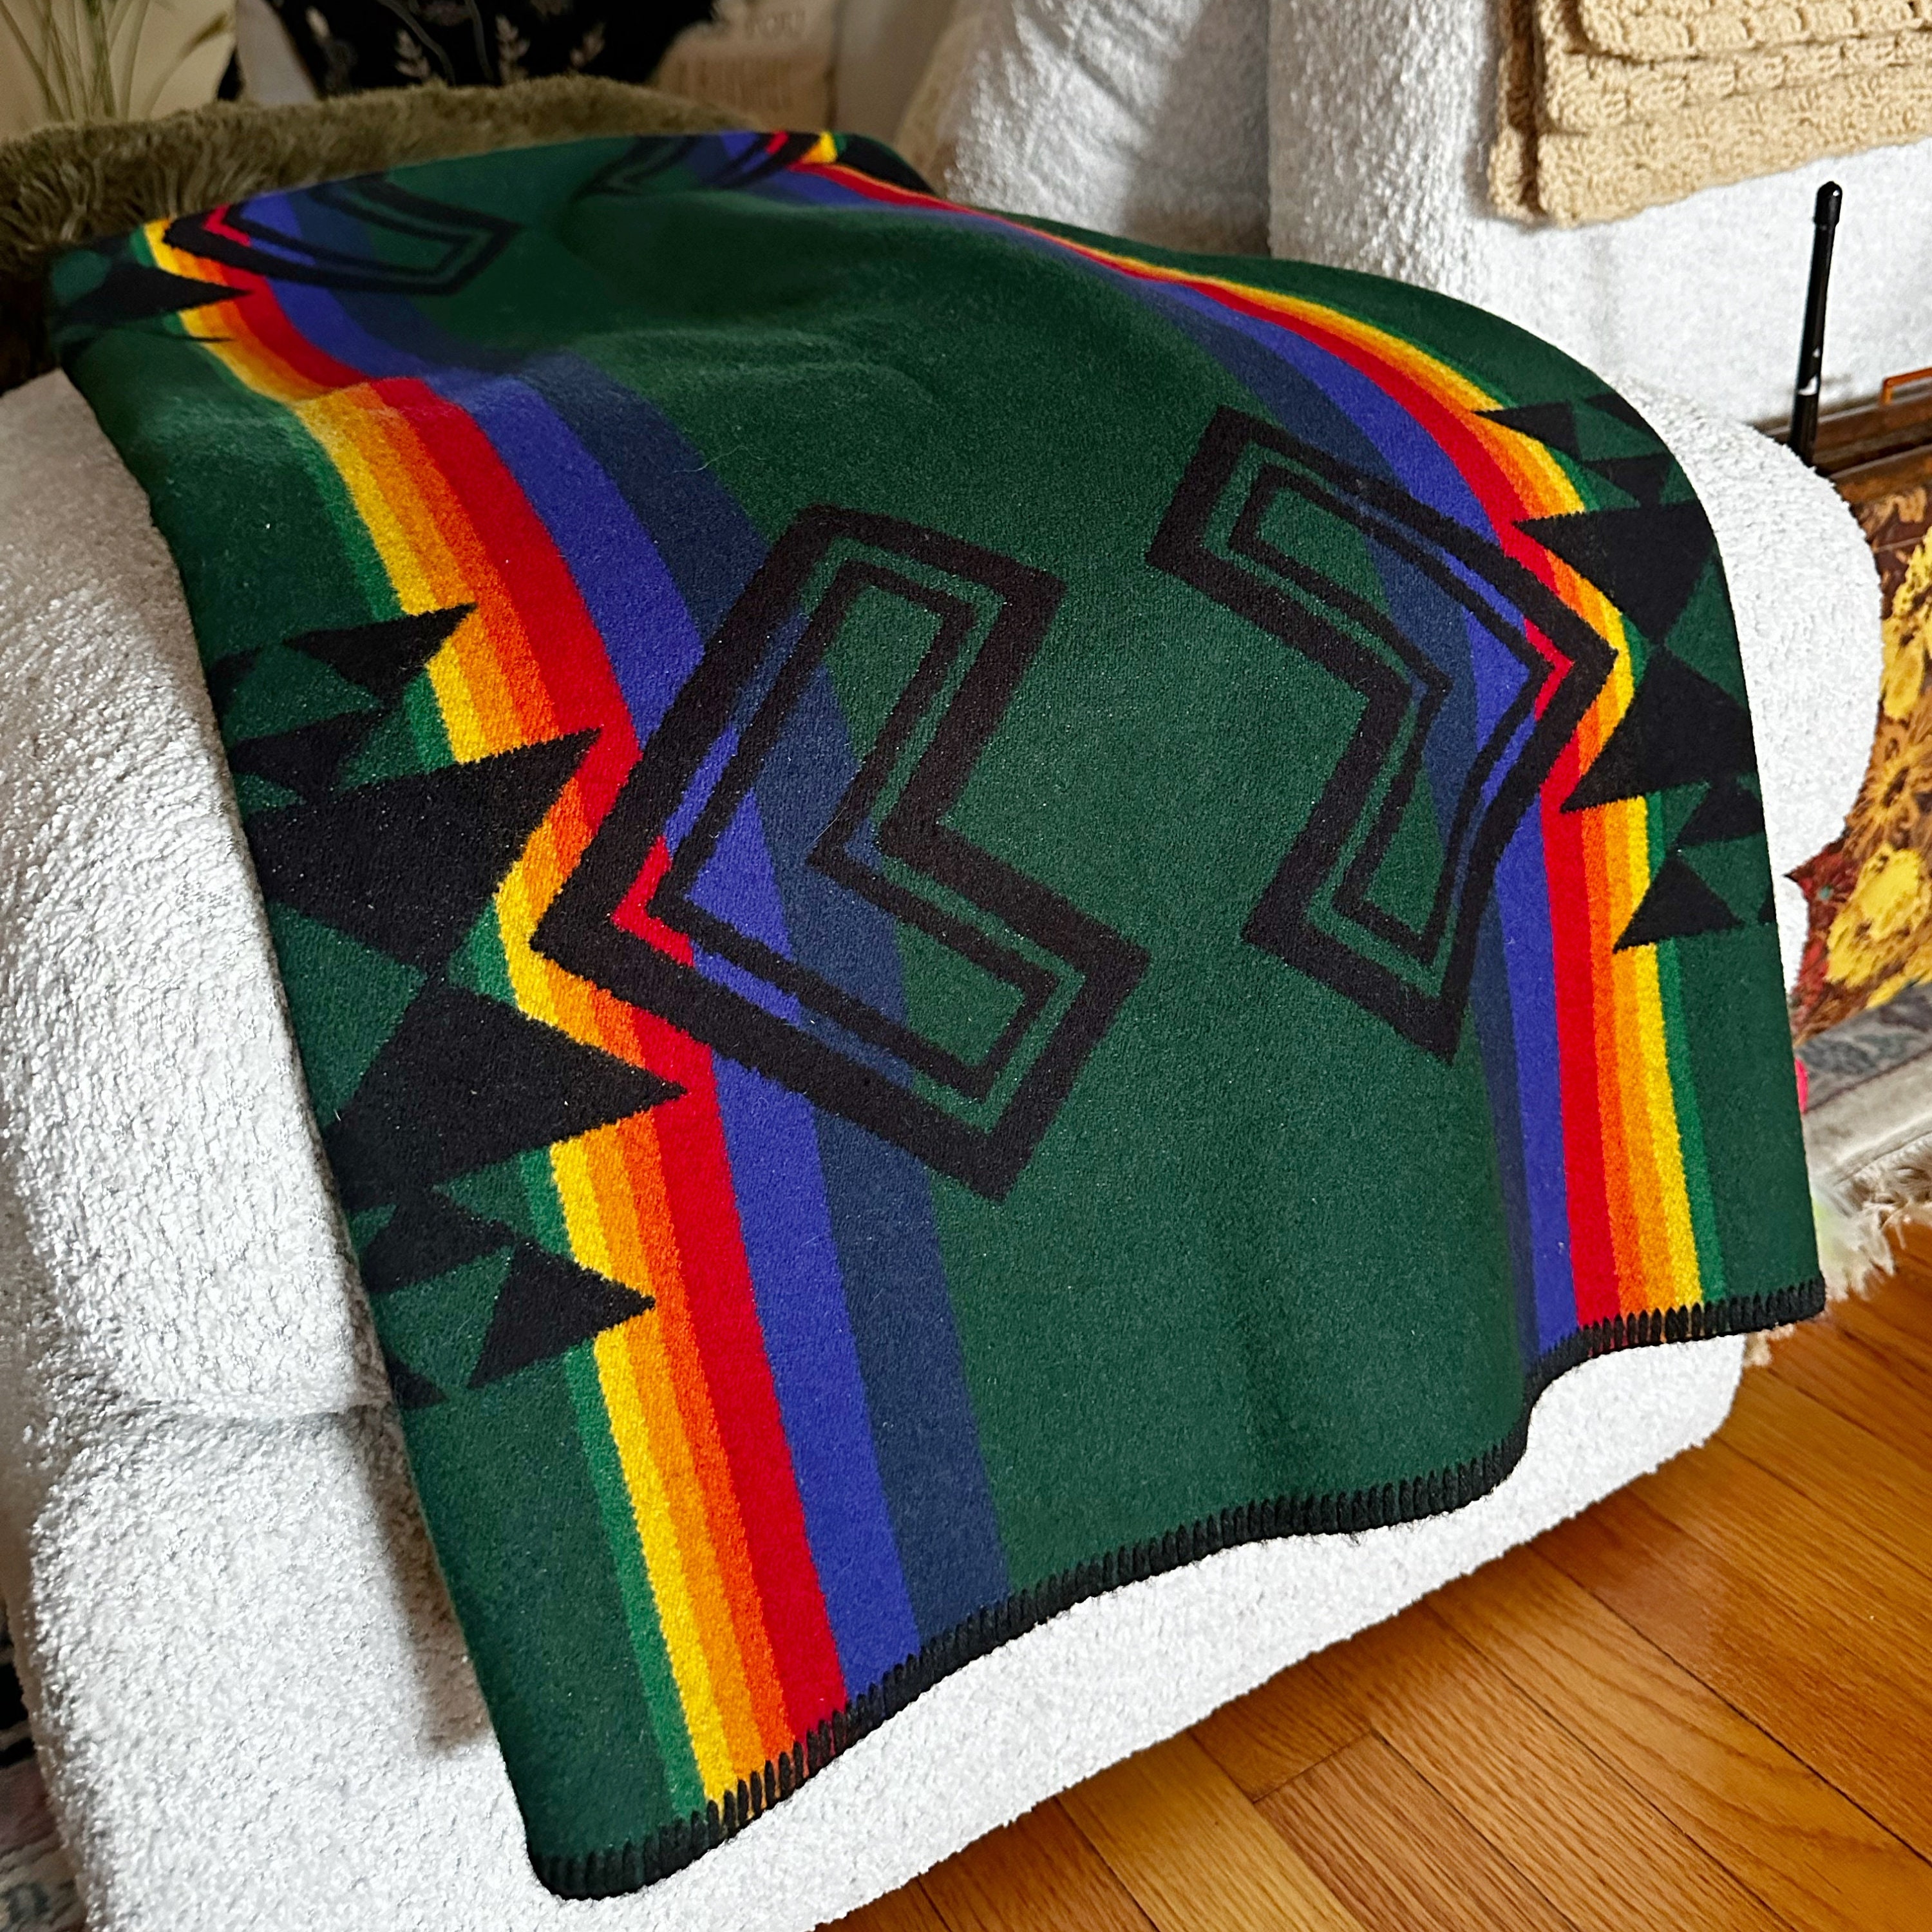 Wooden Blanket Holder Hanger How to Hang A Pendleton Blanket on the Wall 